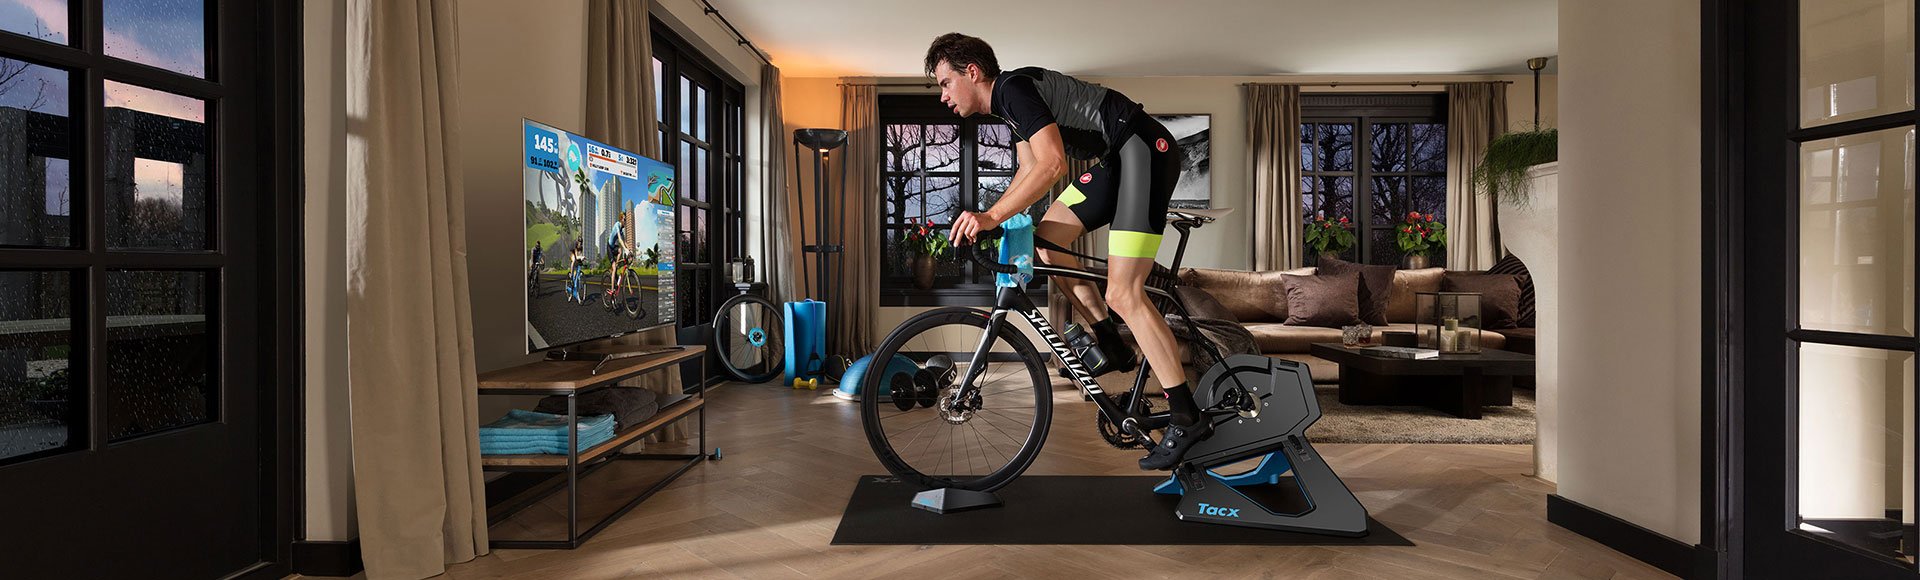 tacx neo 2 buy